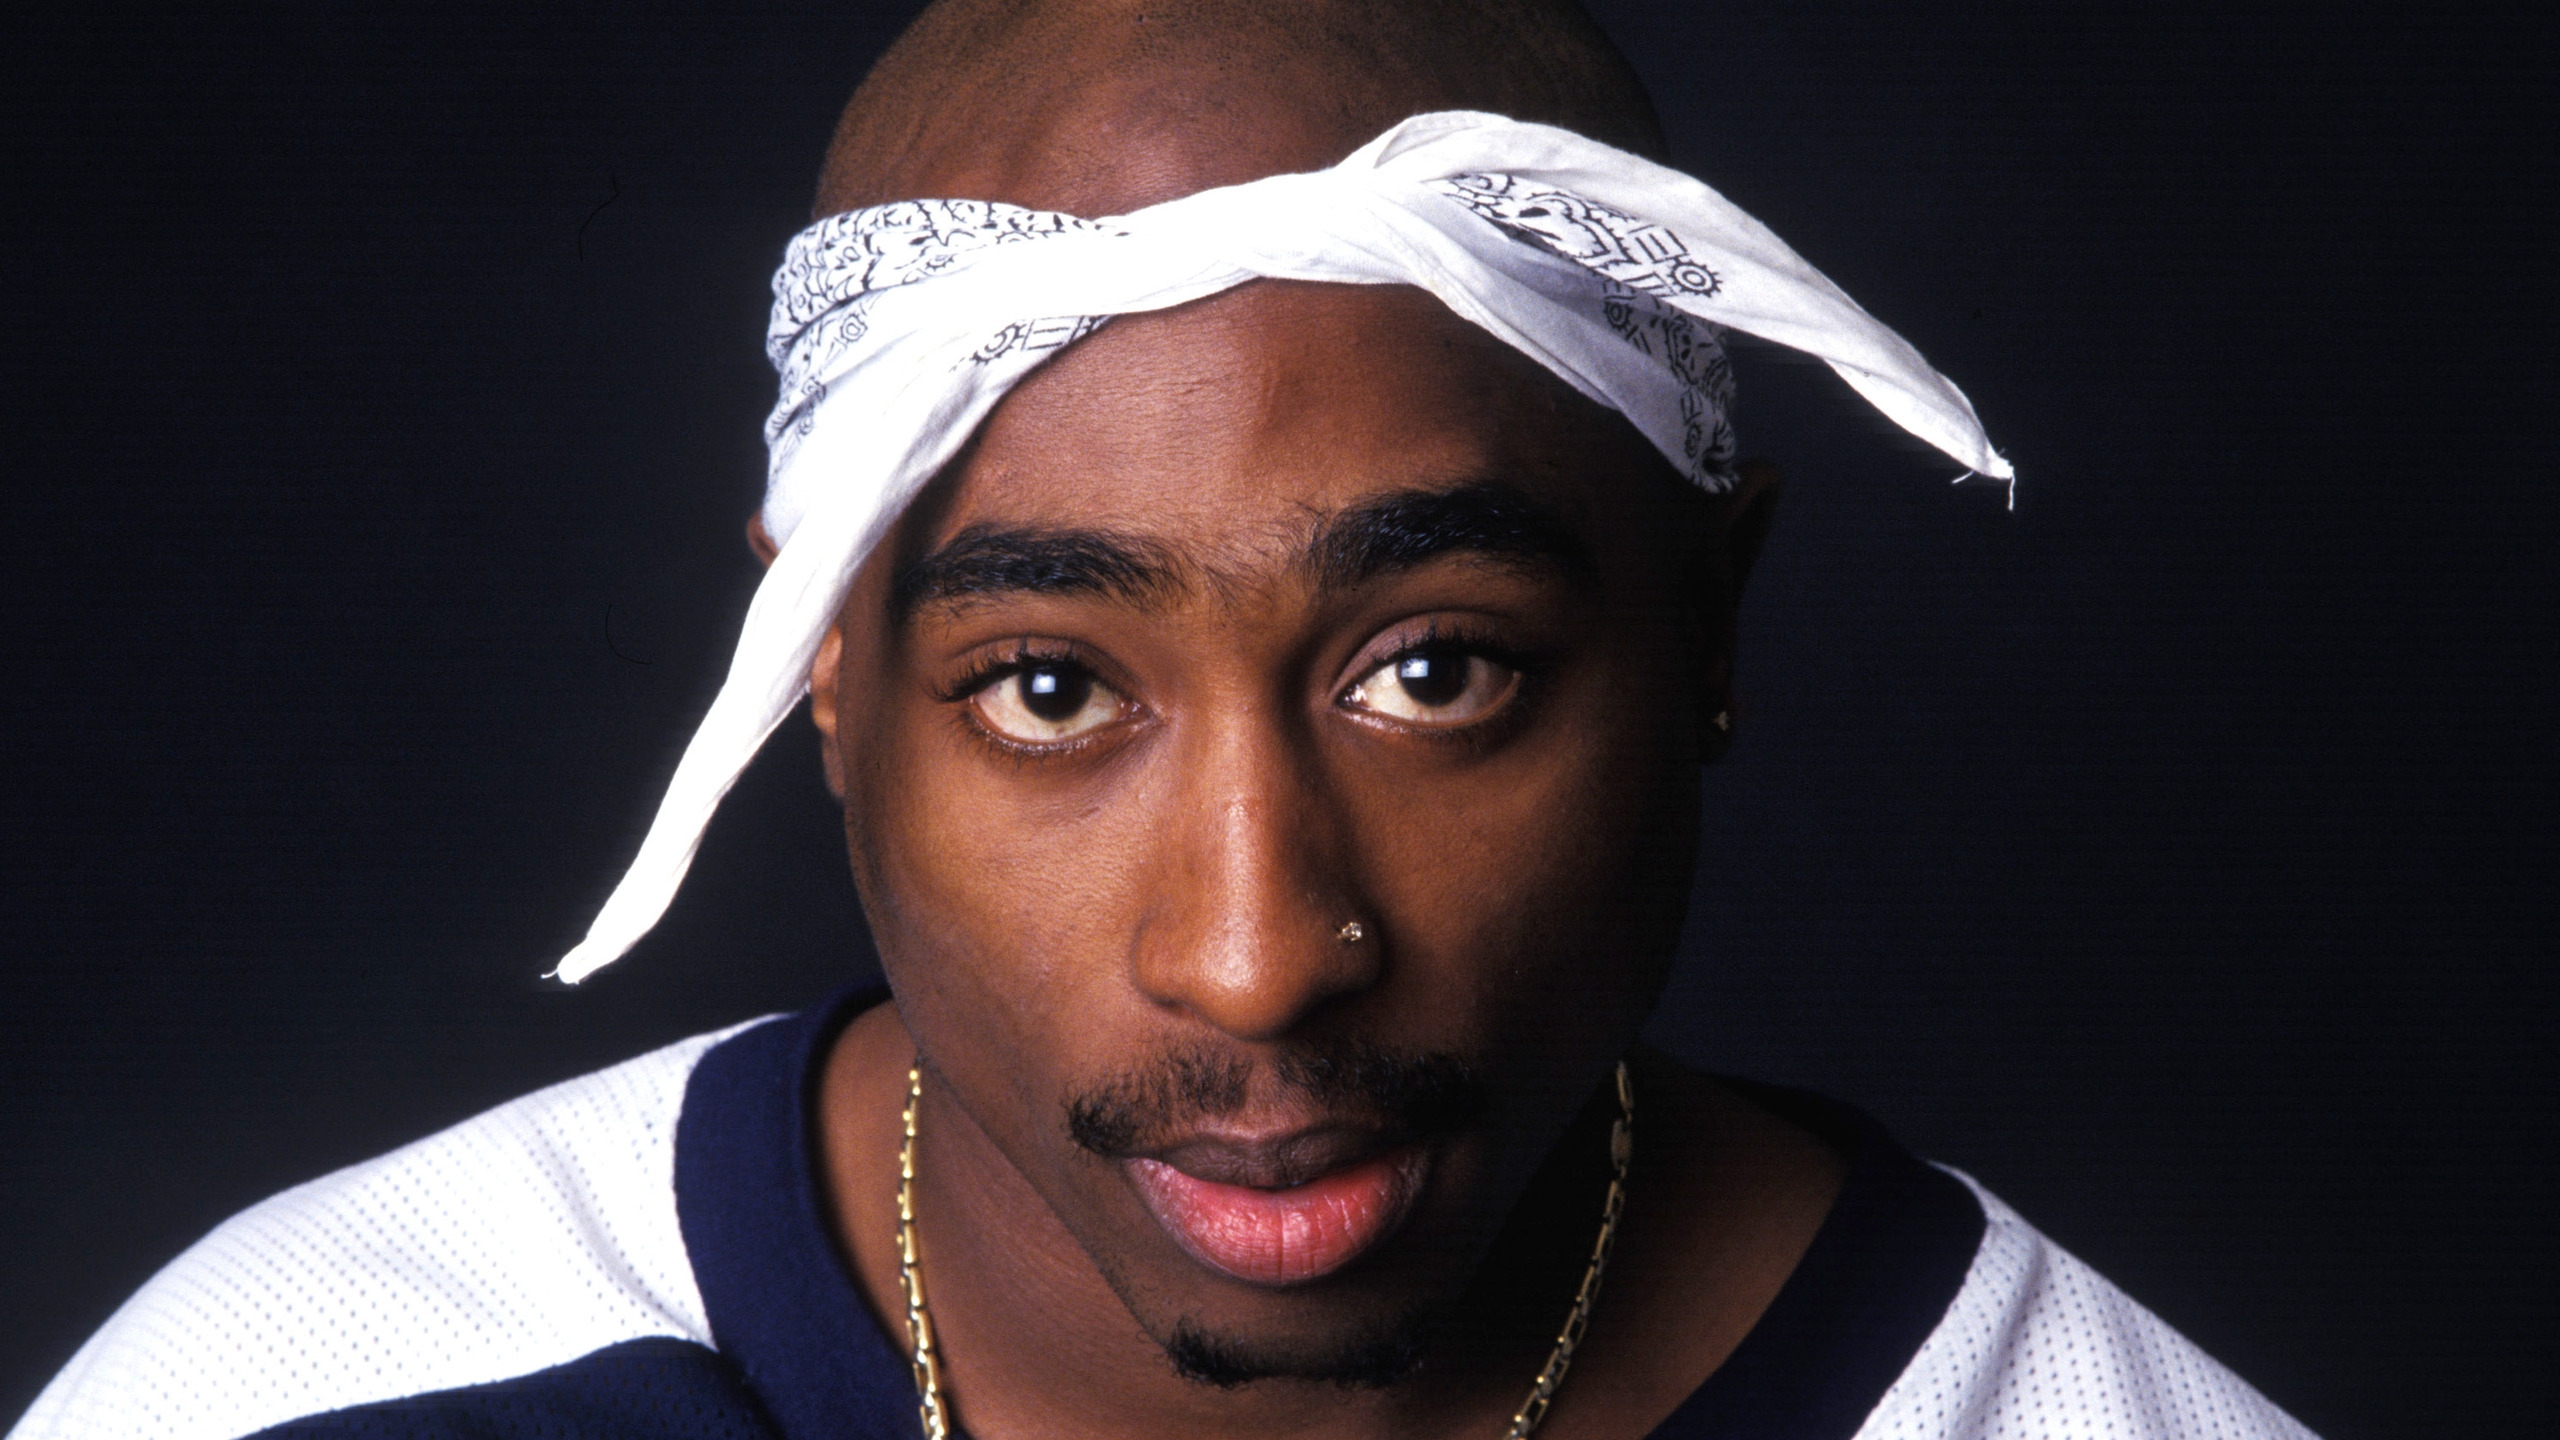 2Pac for 2560x1440 HDTV resolution